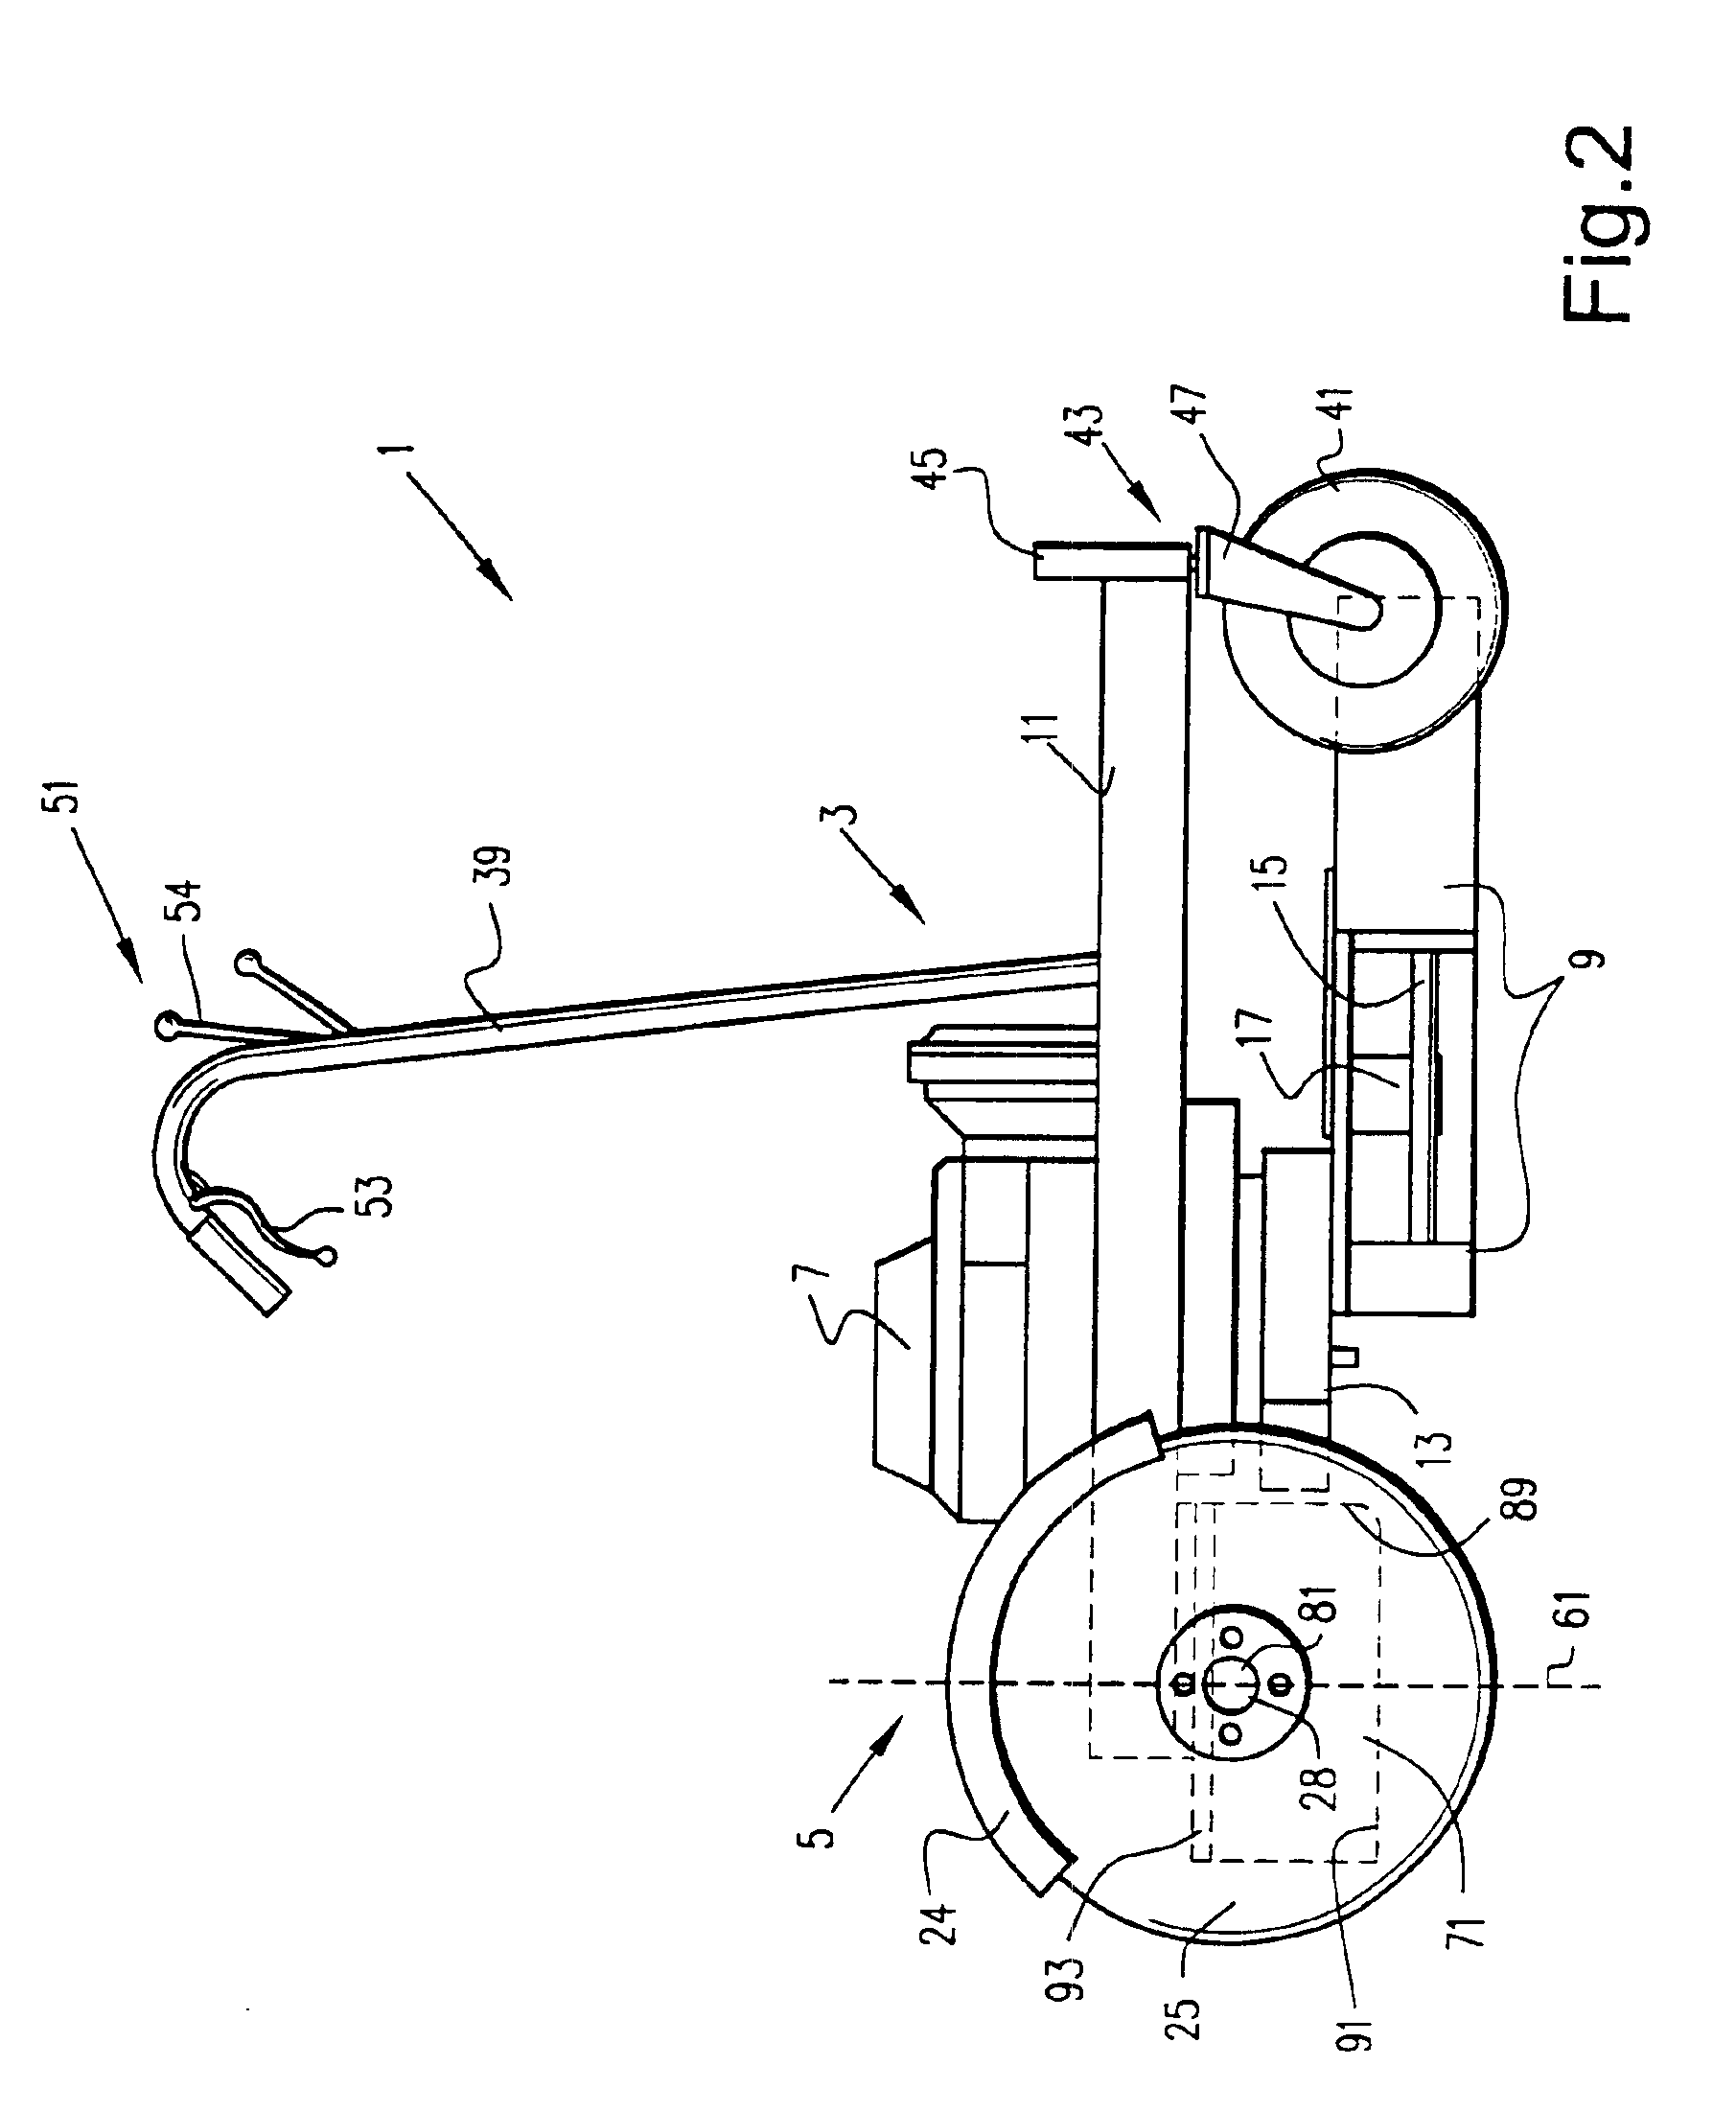 Power mower with pump lock-out system